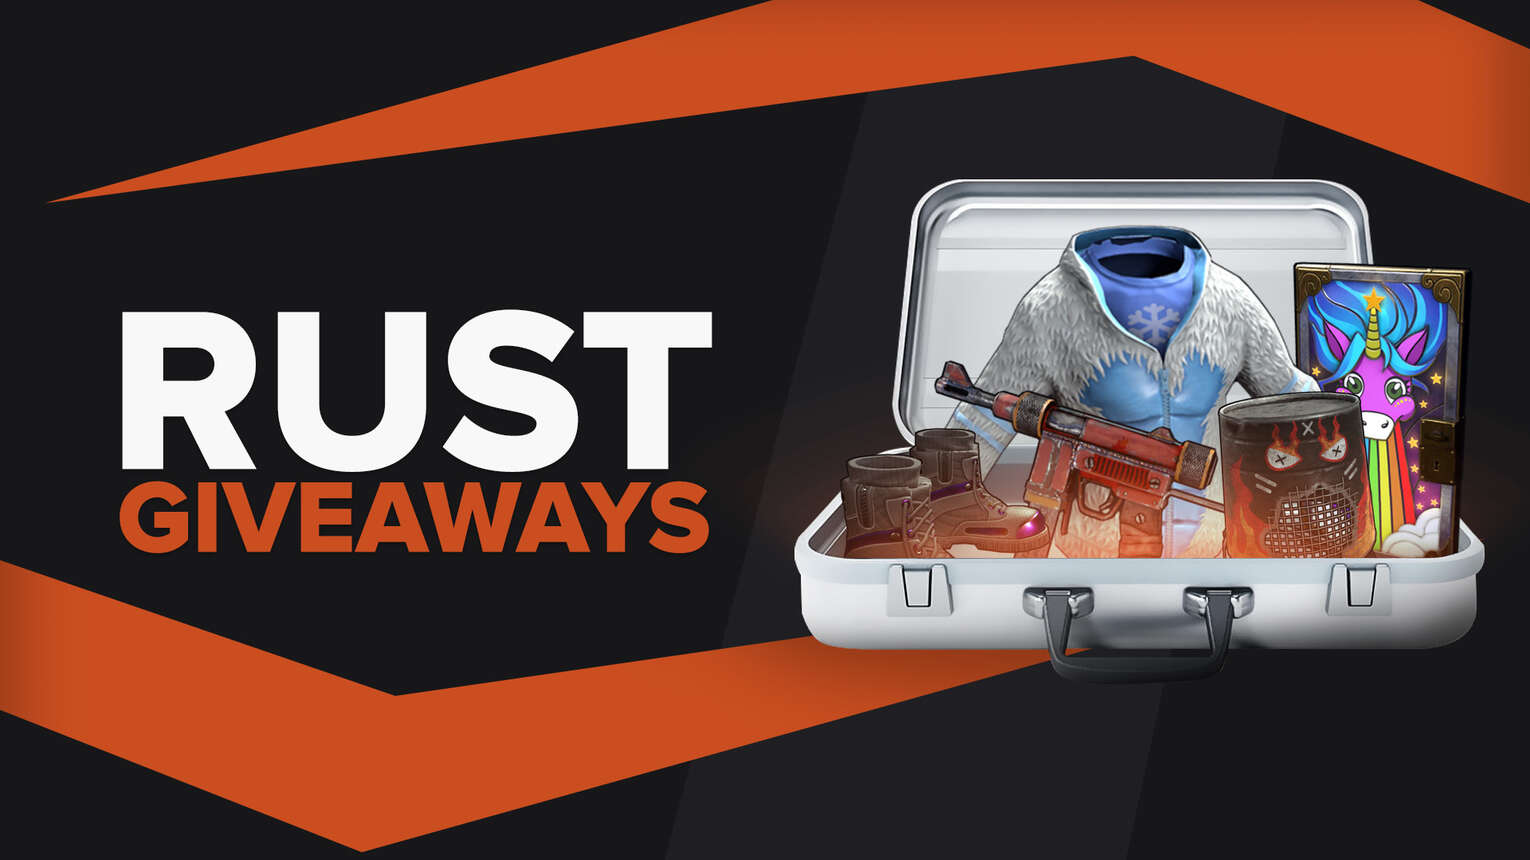 Best Current Rust Giveaways Available